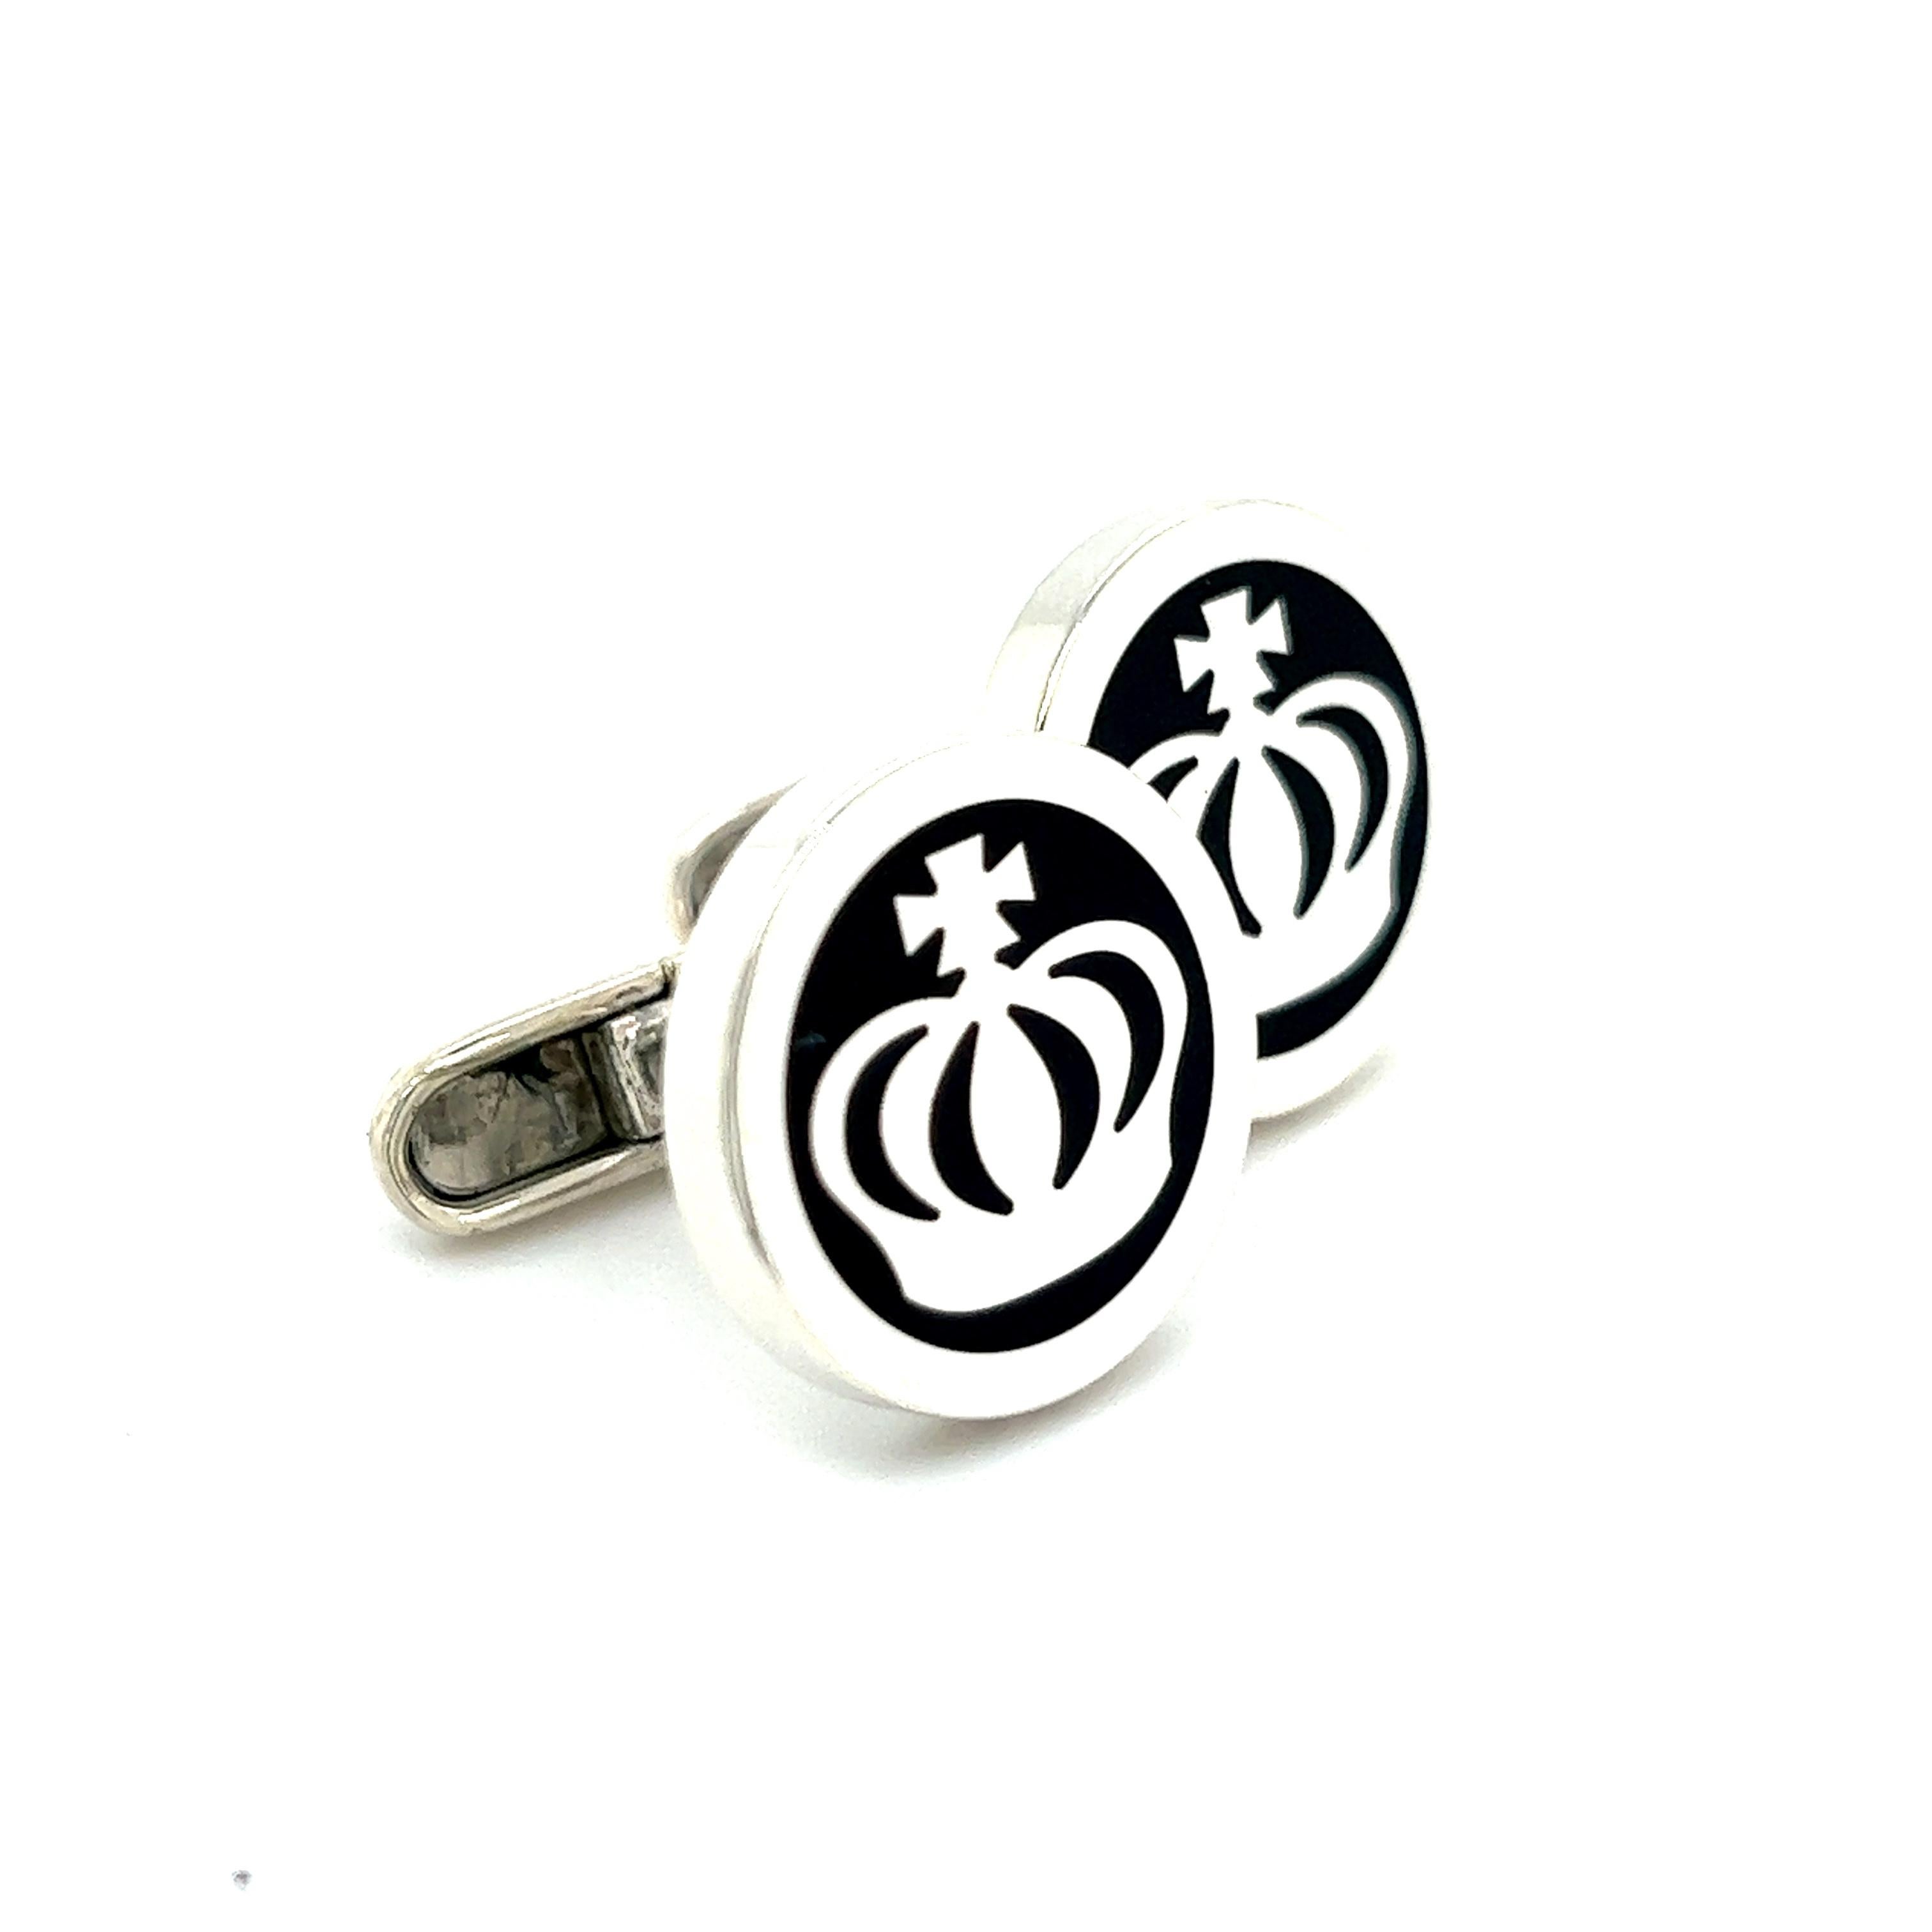 Bulgari Bvlgari Estate Crown Cufflinks Sterling Silver B5

Made in Italy

TRUSTED SELLER SINCE 2002

PLEASE SEE OUR HUNDREDS OF POSITIVE FEEDBACKS FROM OUR CLIENTS!!

FREE SHIPPING

DETAILS
Style: Crown Cufflinks
Material: Sterling Silver
Weight: 16